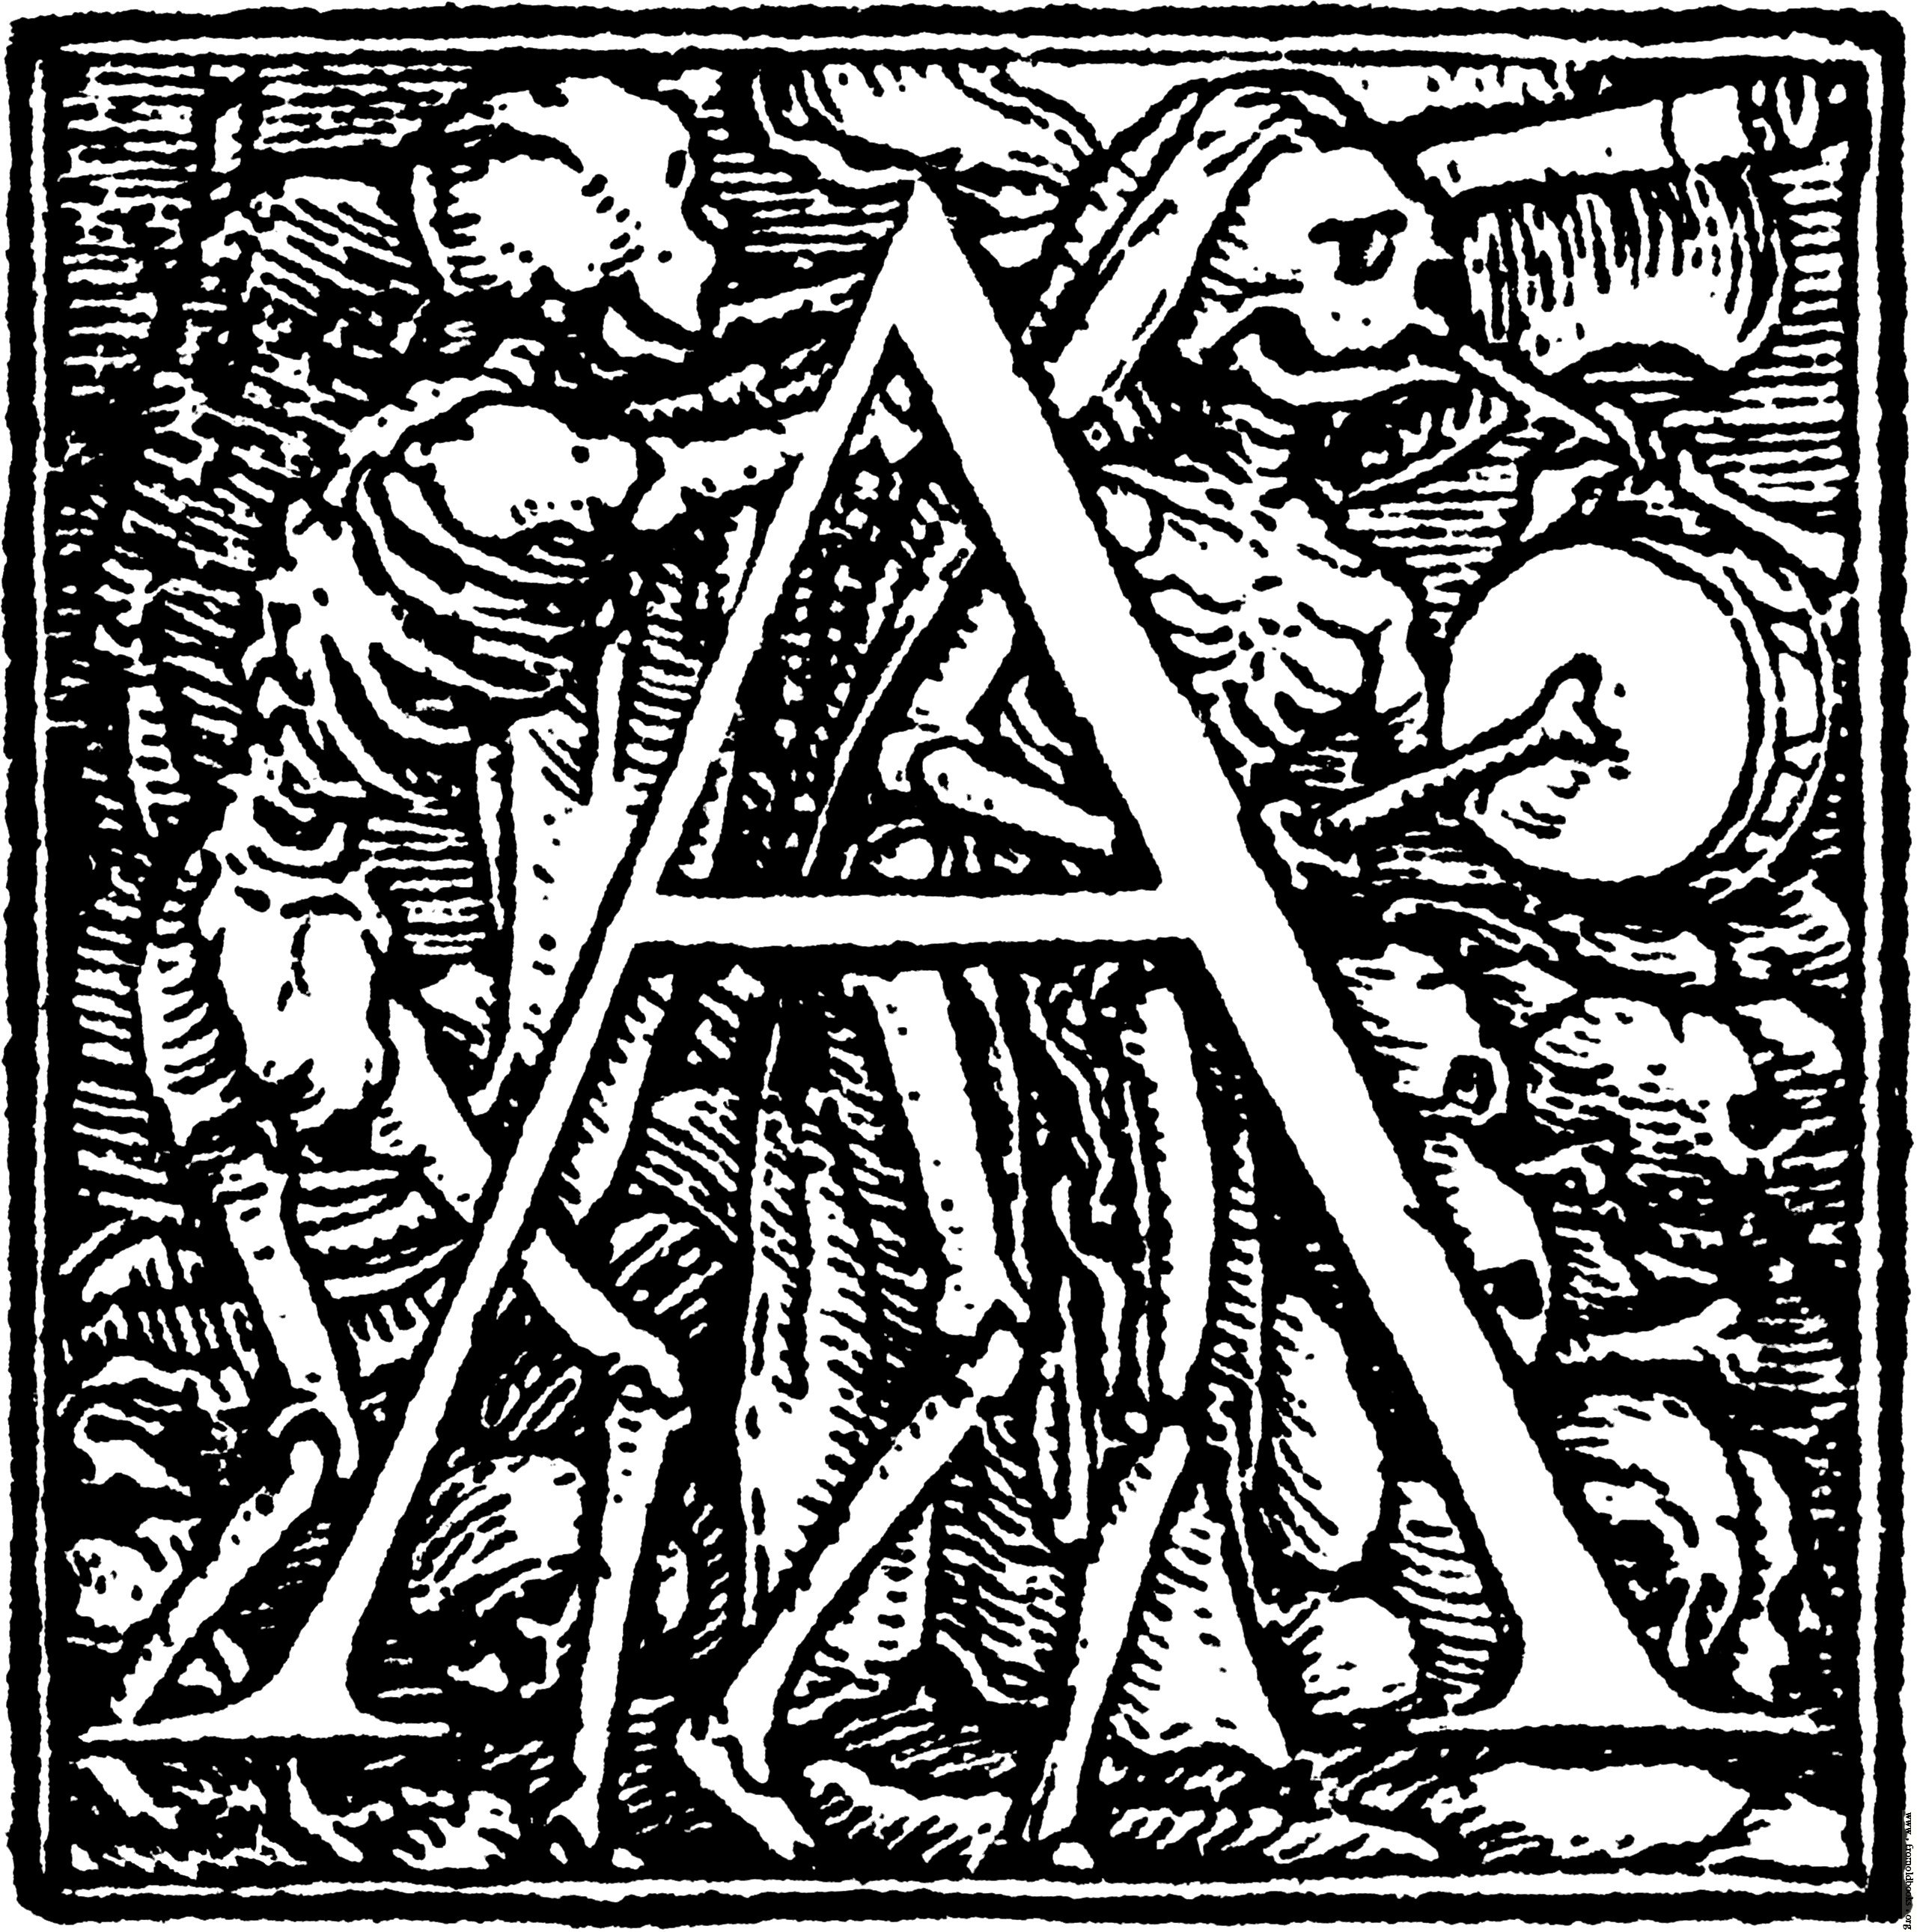 62a.—Initial capital letter “A” from Dance of Death Alphabet